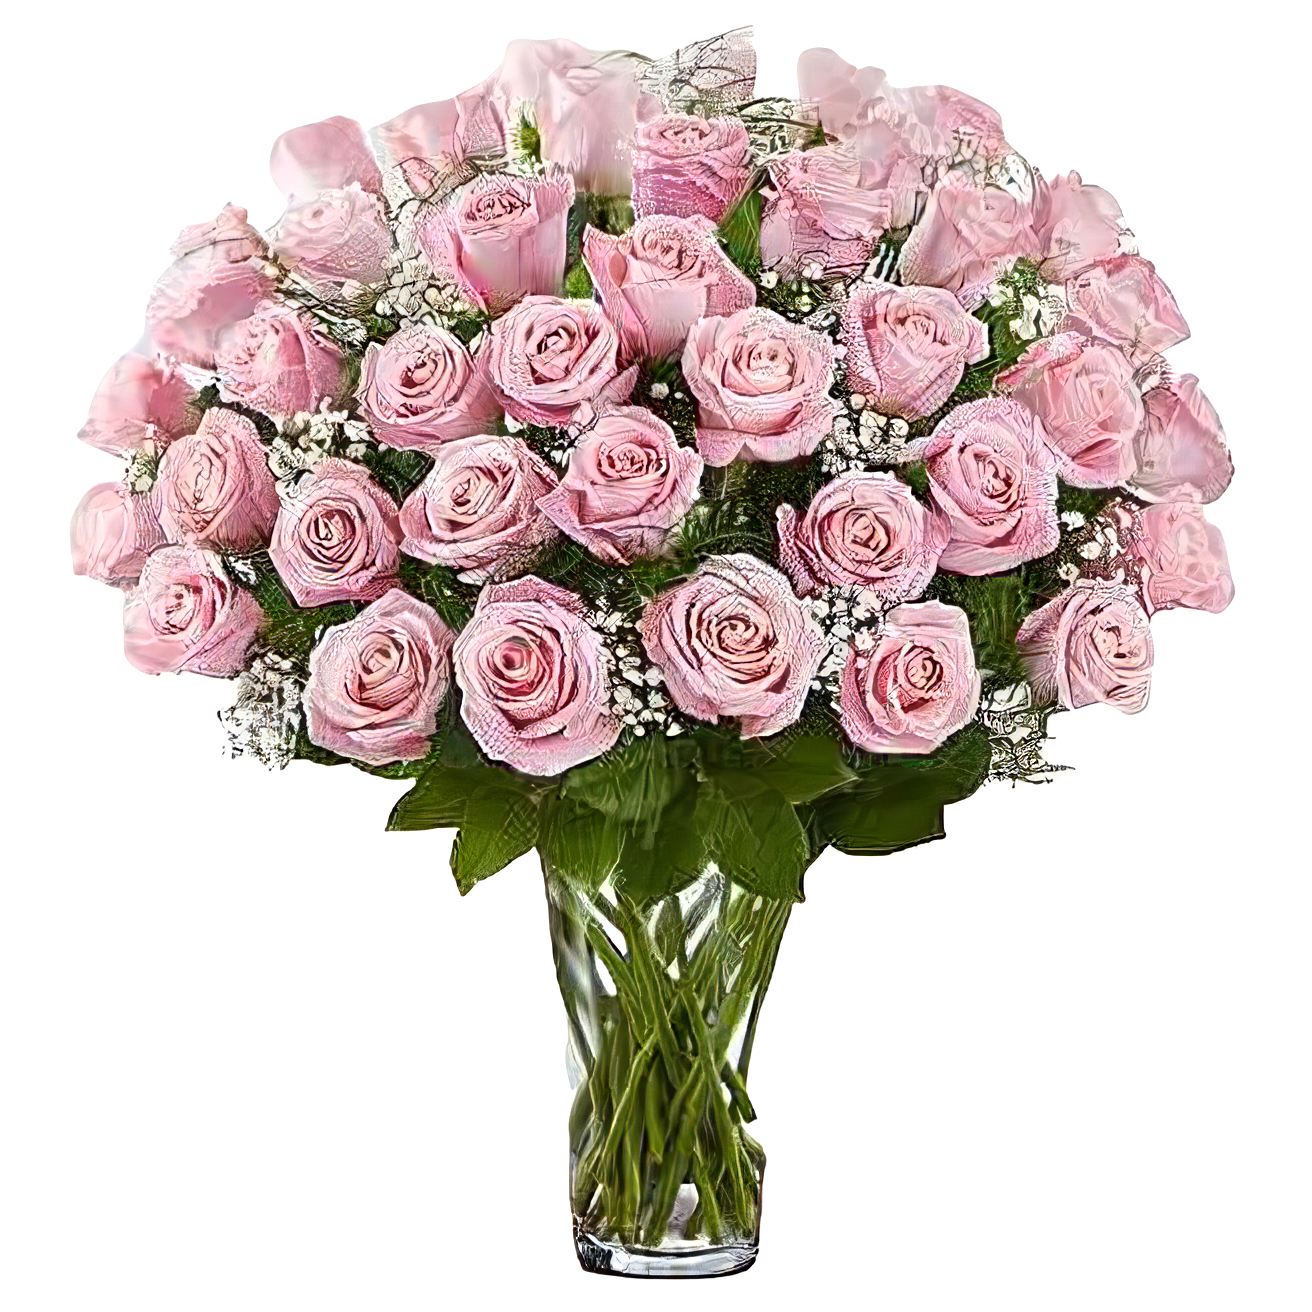 NYC Flower Delivery - Premium Long Stem 48 Pink Roses - Roses